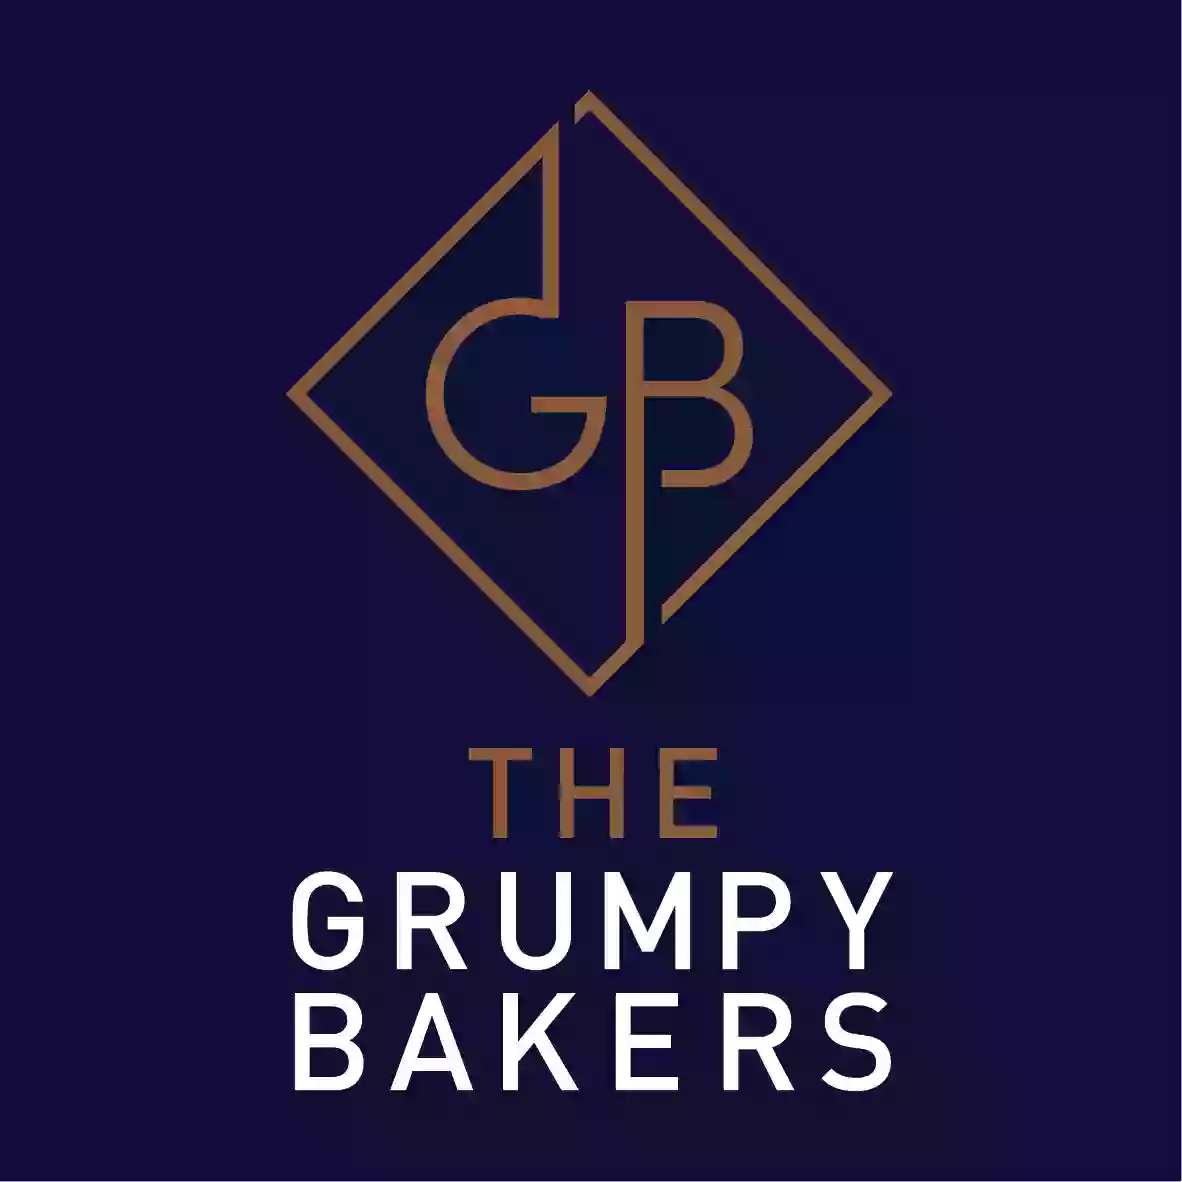 The Grumpy Bakers